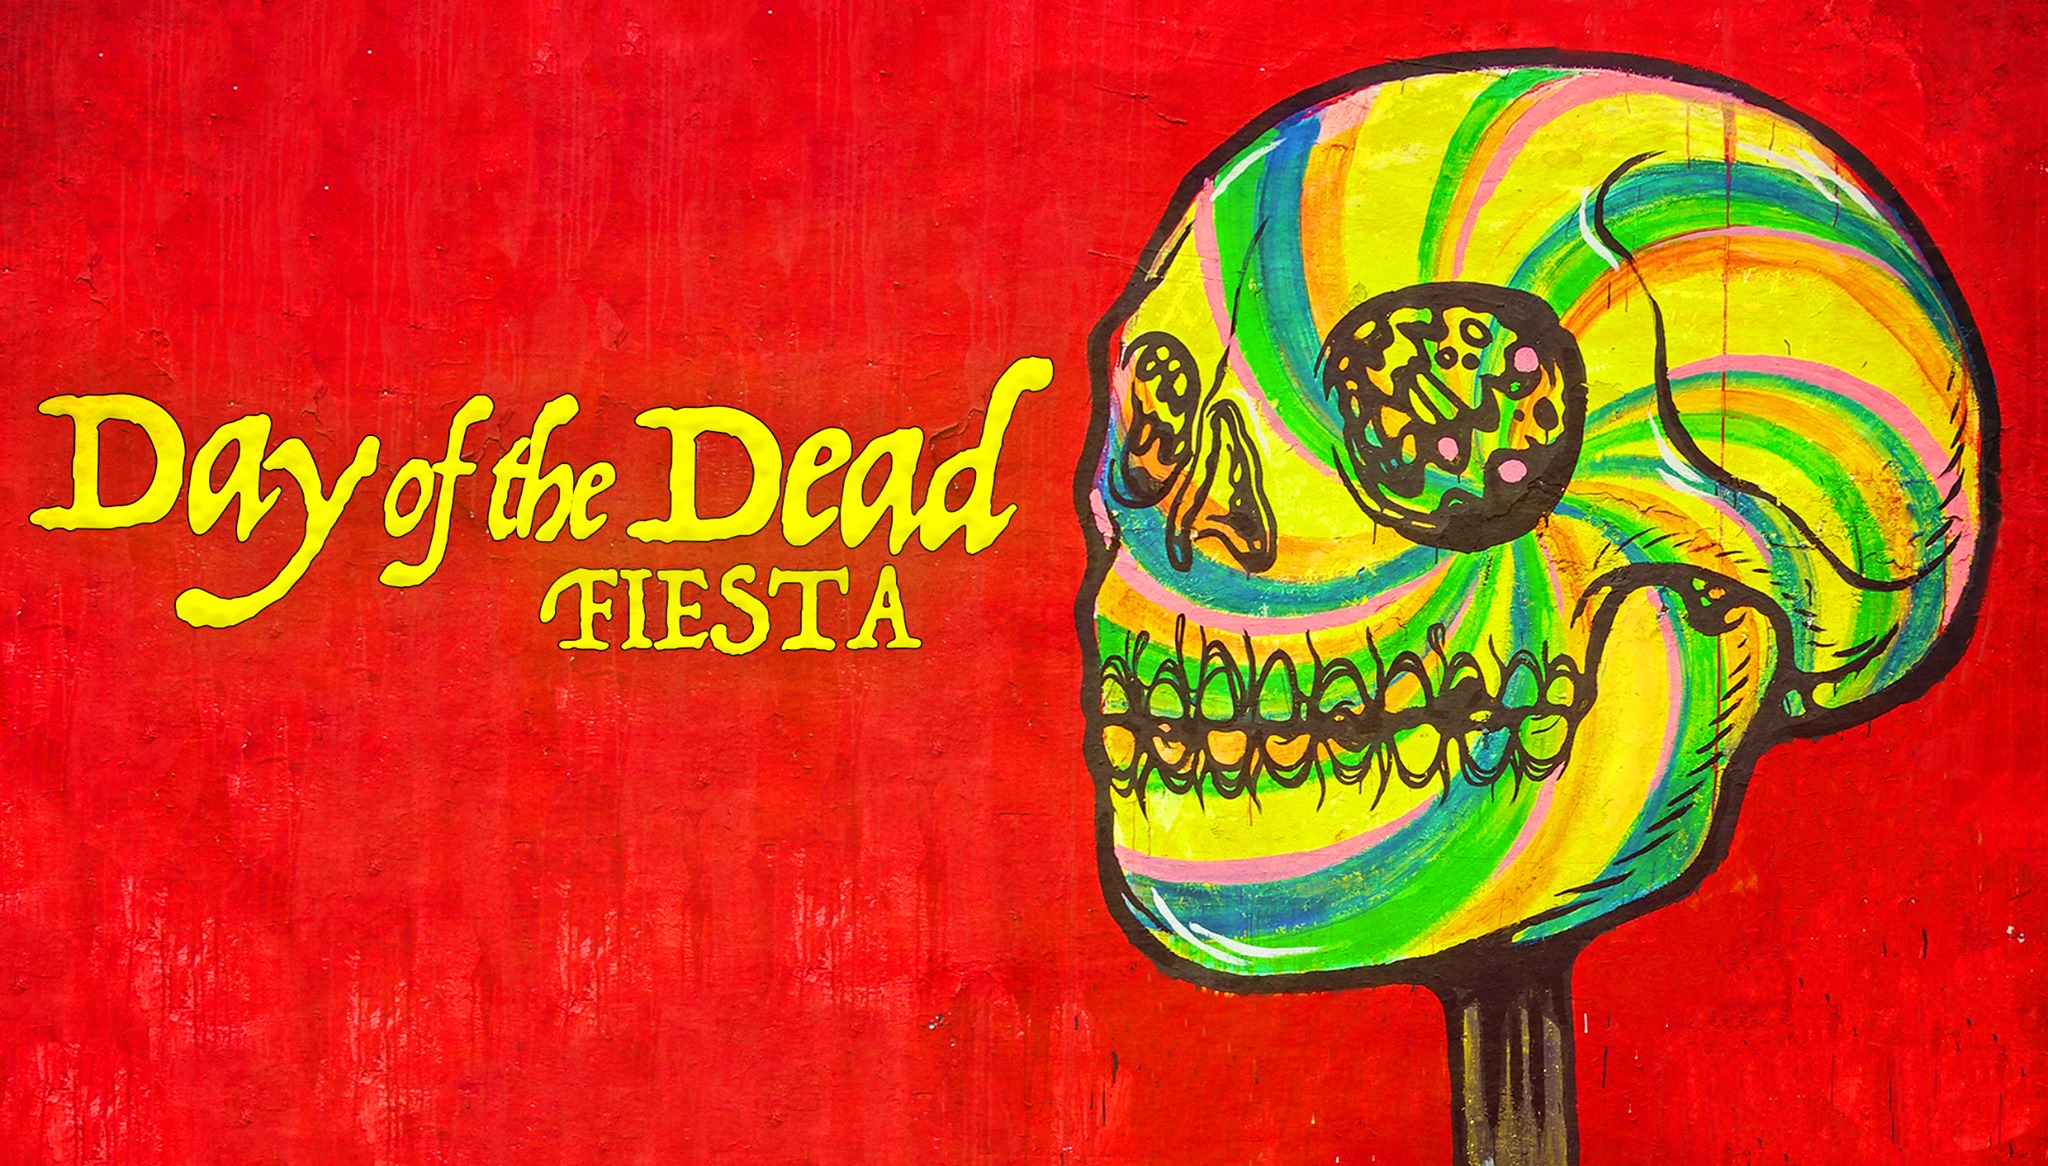 Day Of The Dead Fiesta image